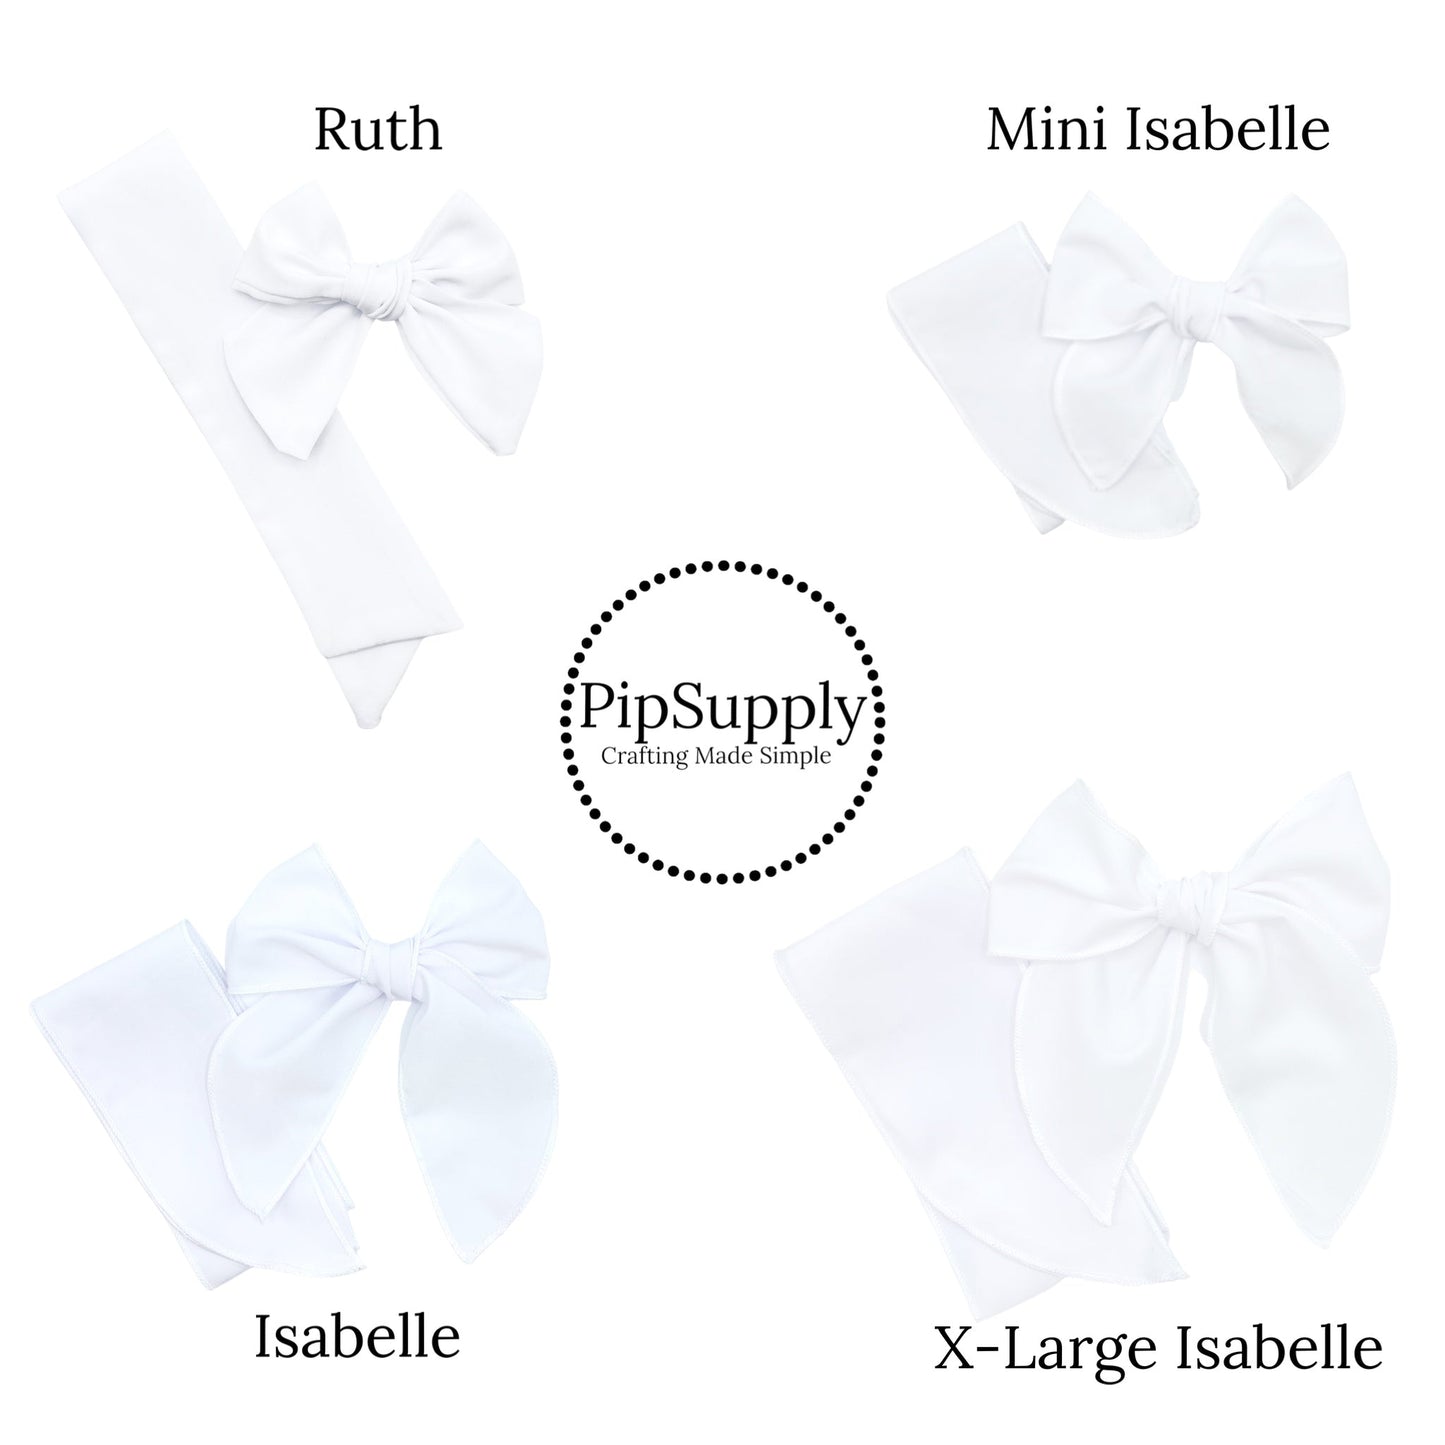 Spellbound Periwinkle Hair Bow Strips